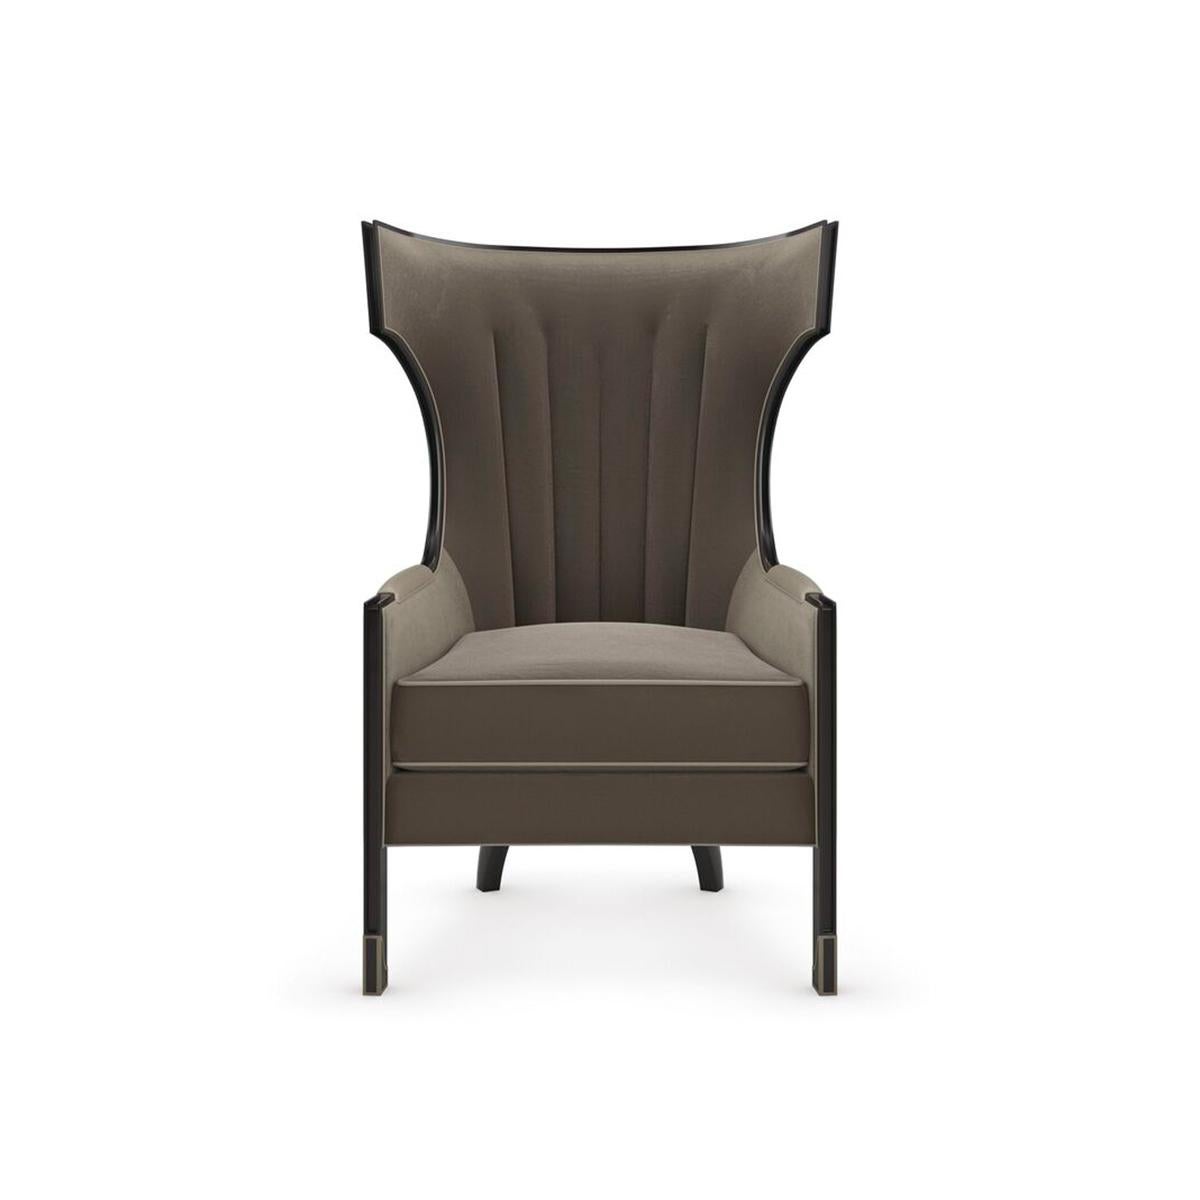 Mid-Century Updated Wingchair, a contemporary take on the classic wing chair. Beckoning in a lush pewter velvet with channeled seams along the back, it features a shapely, slender wood frame in Almost Black, accentuated by padded armrests and welt